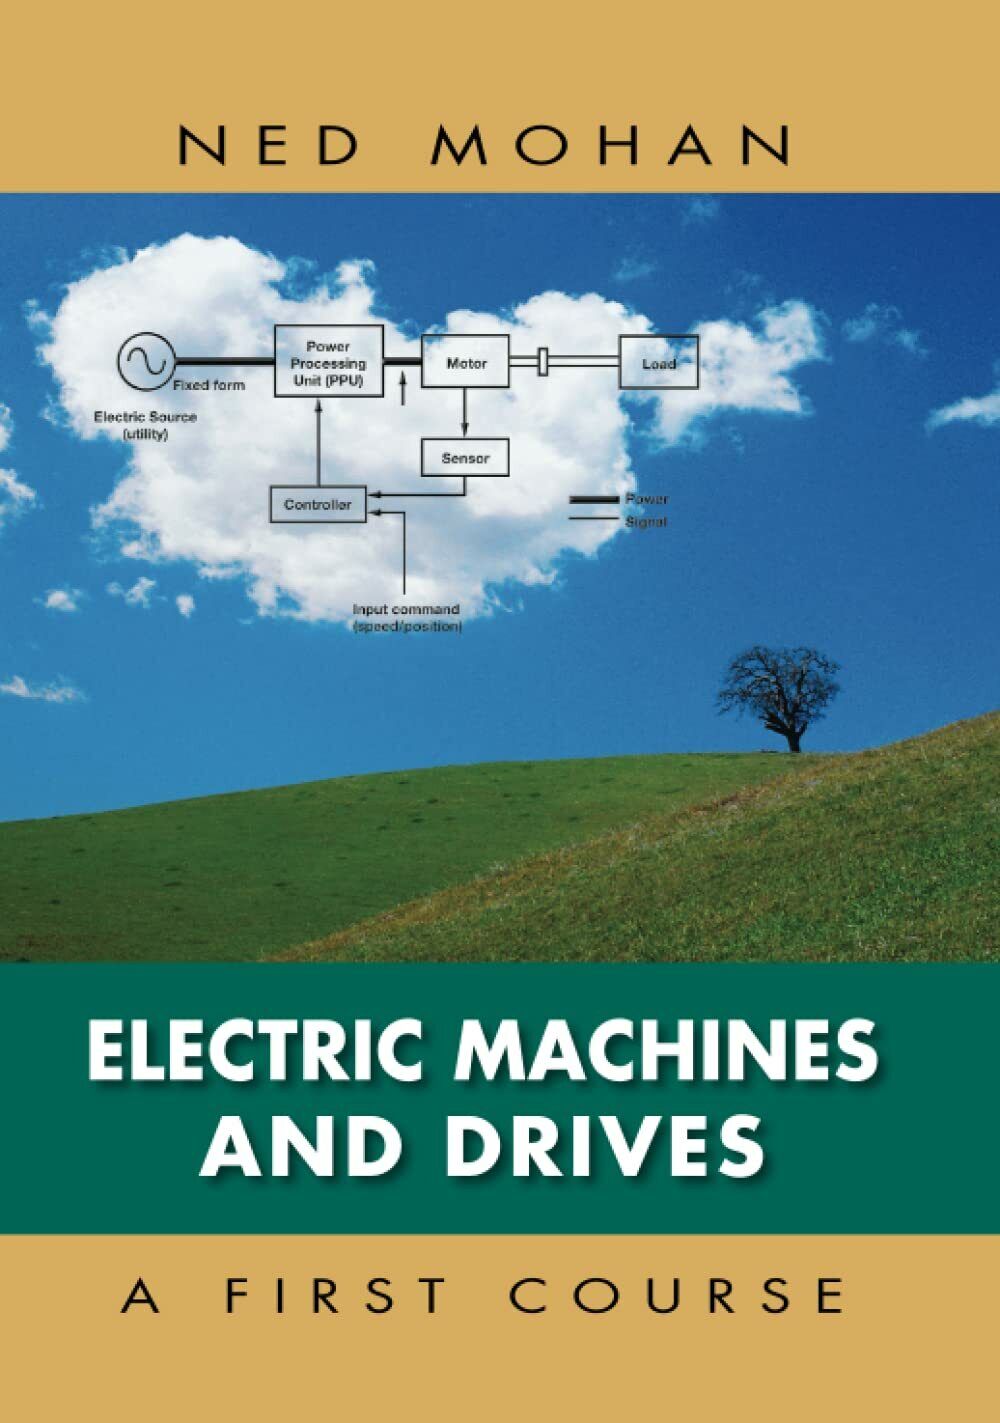 Electric Machines and Drives: A First Course - Ned Mohan - WILEY, 2011